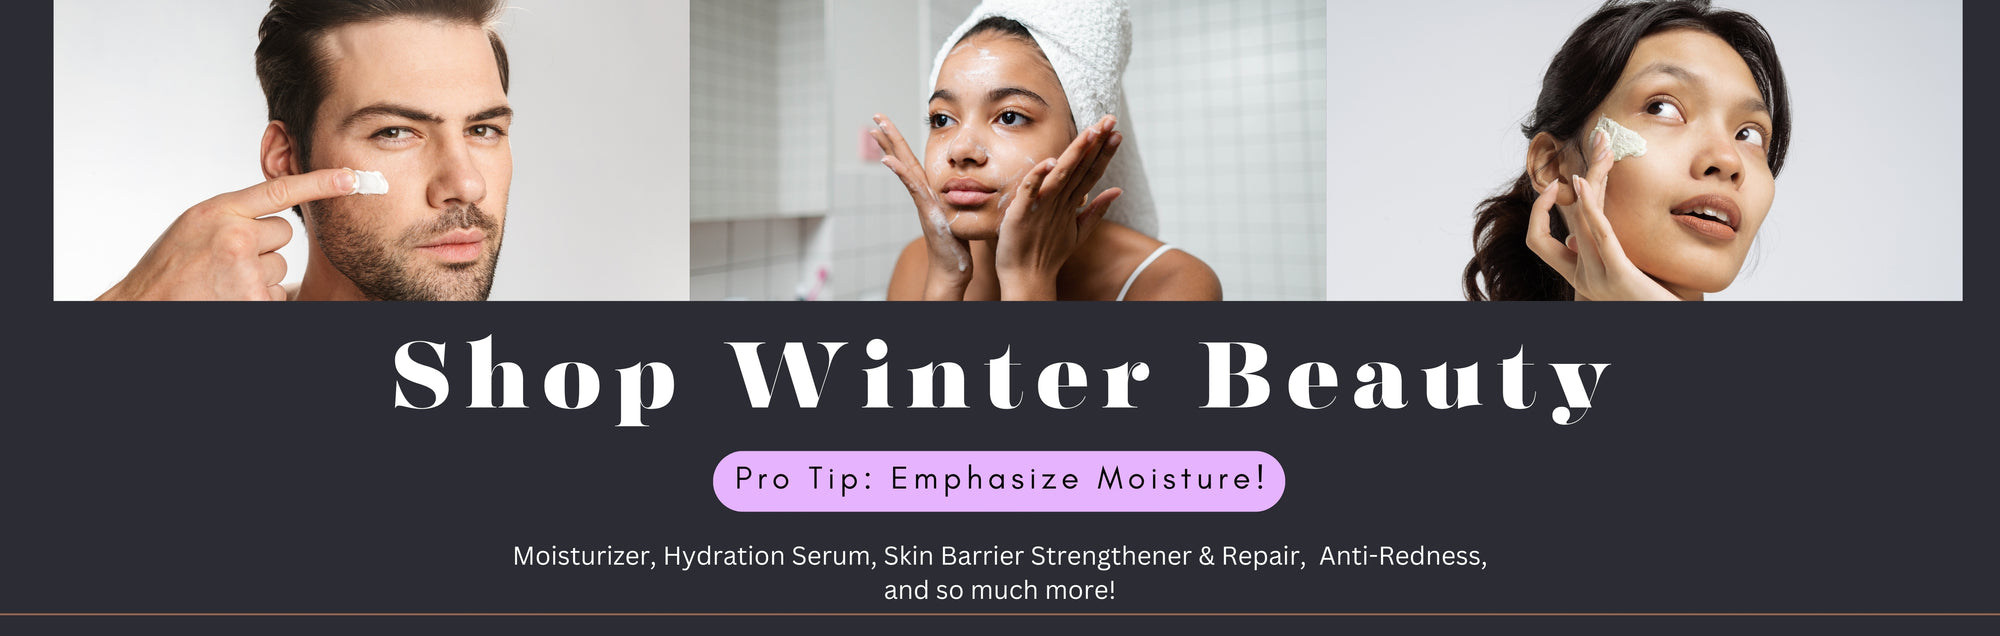 Shop Winter Beauty Products